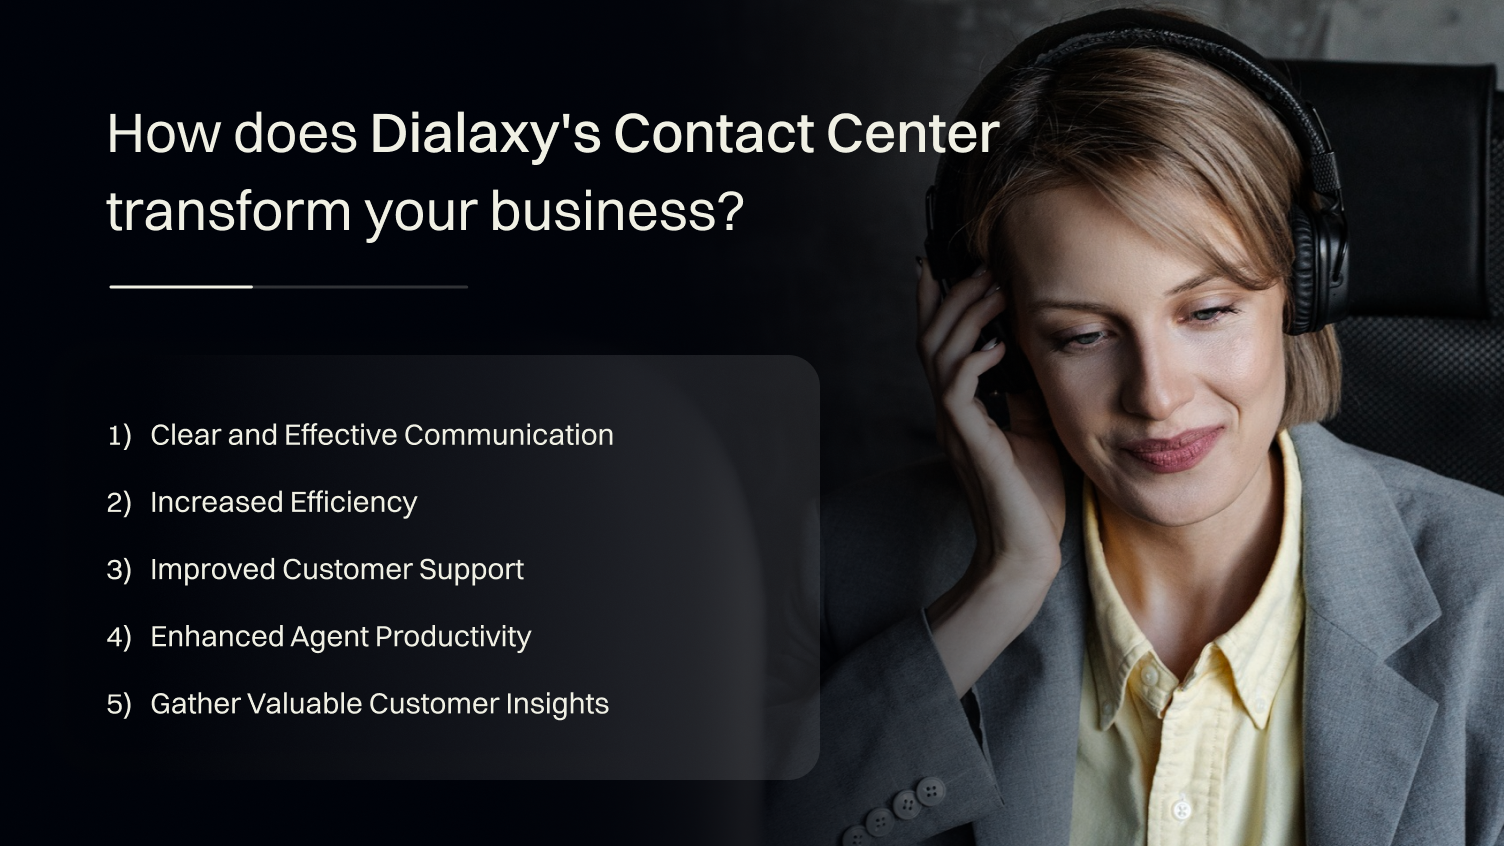 How does Dialaxy's Contact center transform your business?